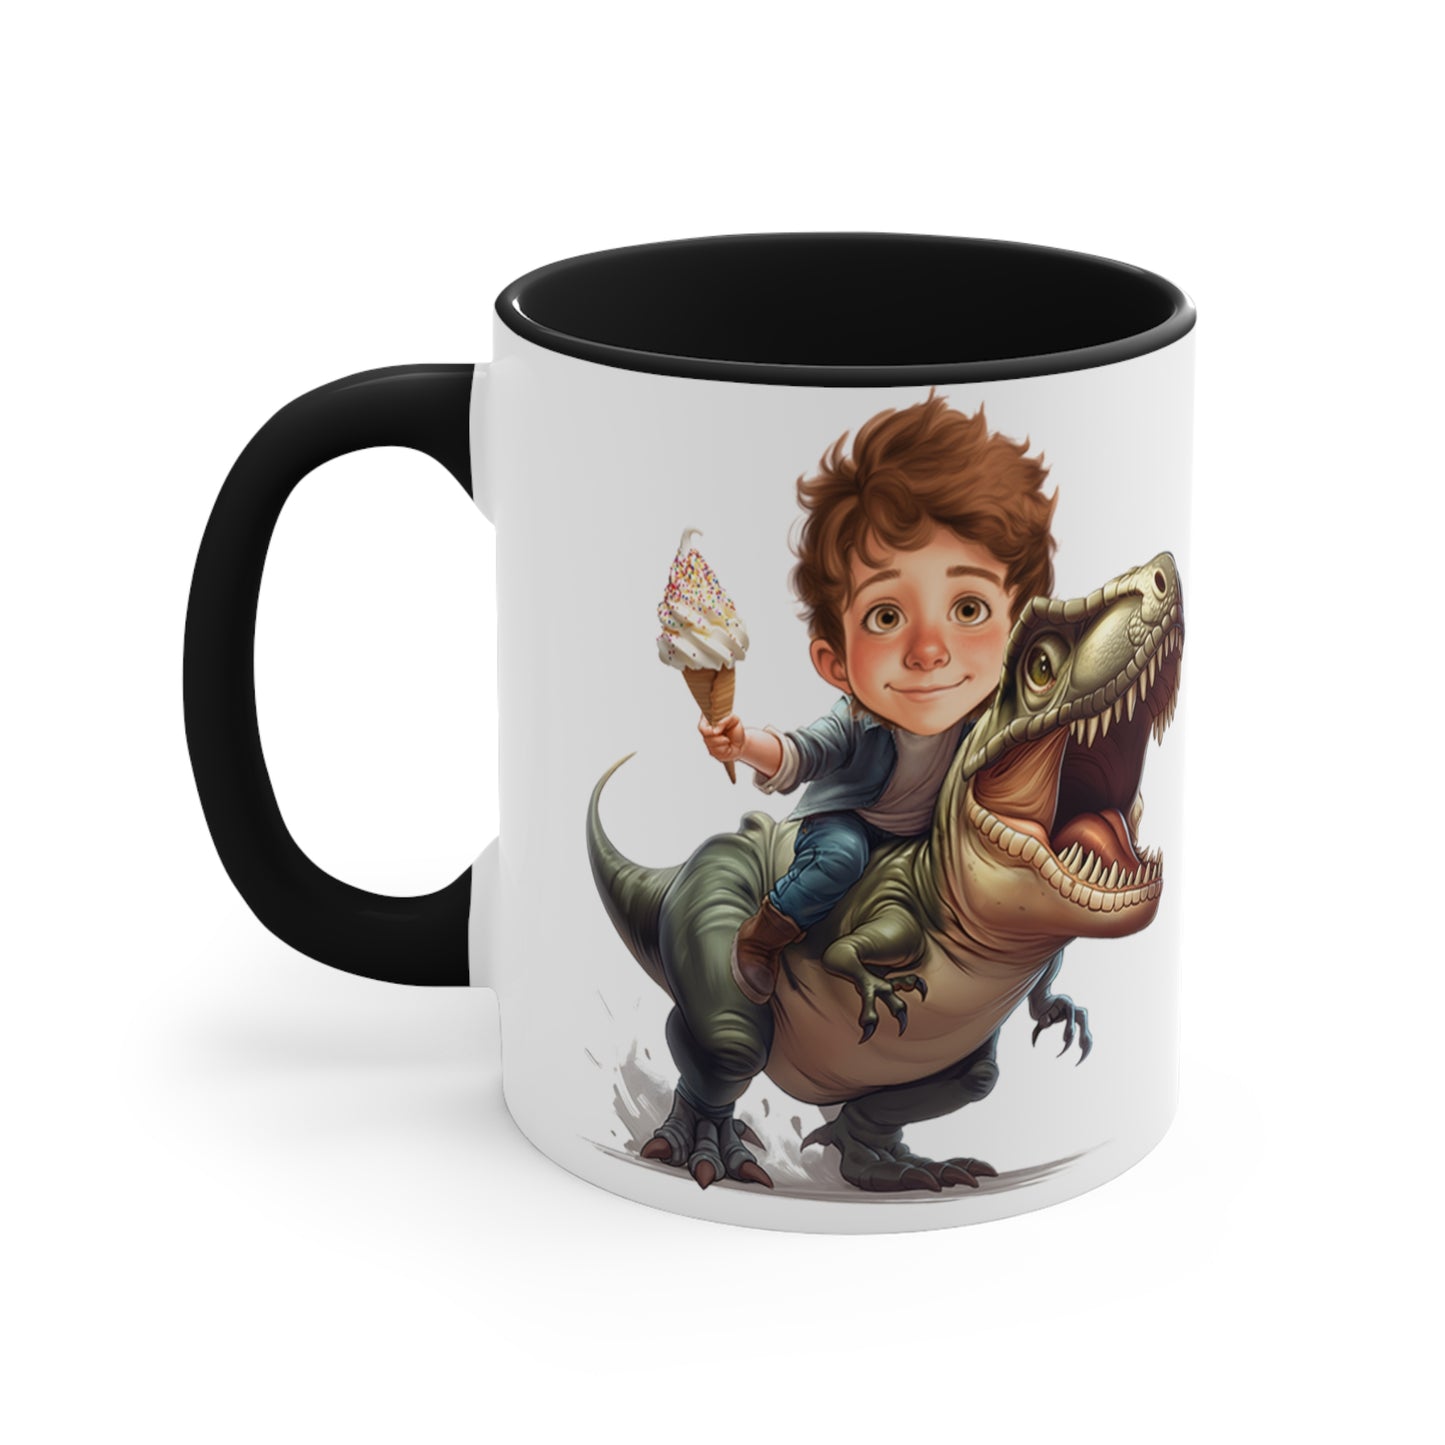 Child Riding a T Rex Coffee Mug Caricature From Photo